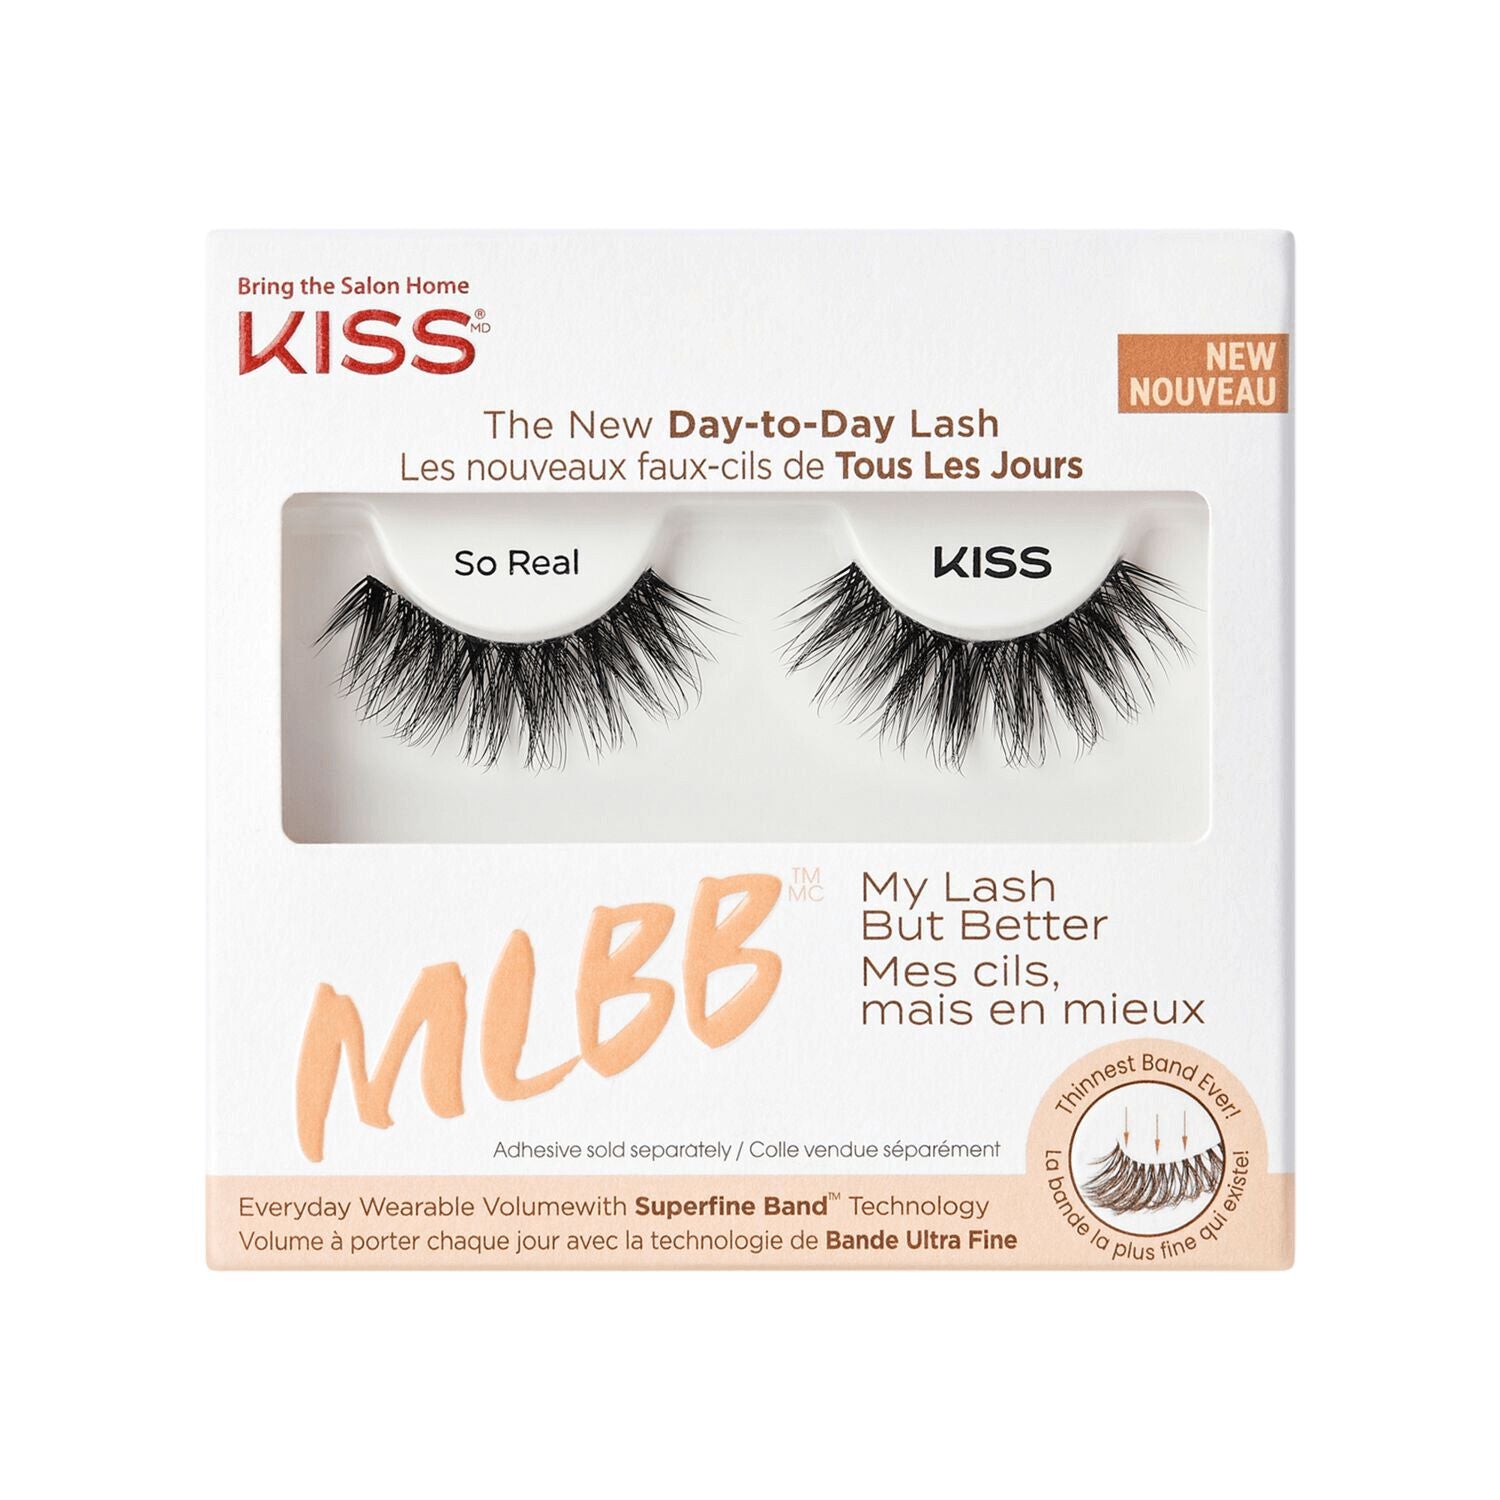 My Lash But Better  by   KISS My Lash But Better Fake Eyelashes - So Real